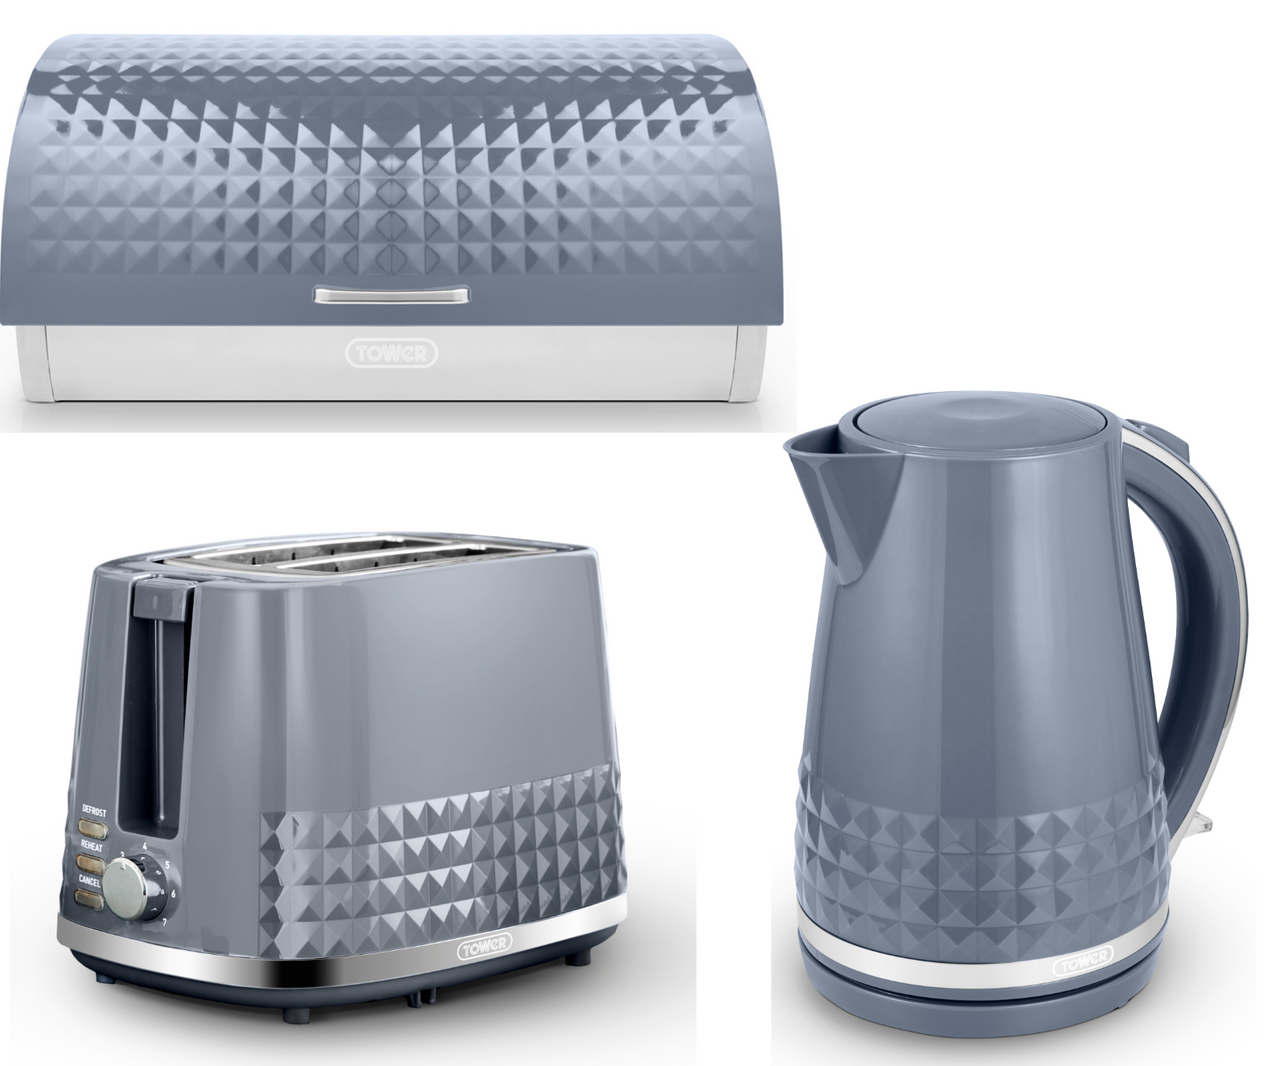 Tower Solitaire Kettle 2 Slice Toaster & Bread Bin Grey & Chrome Matching Set